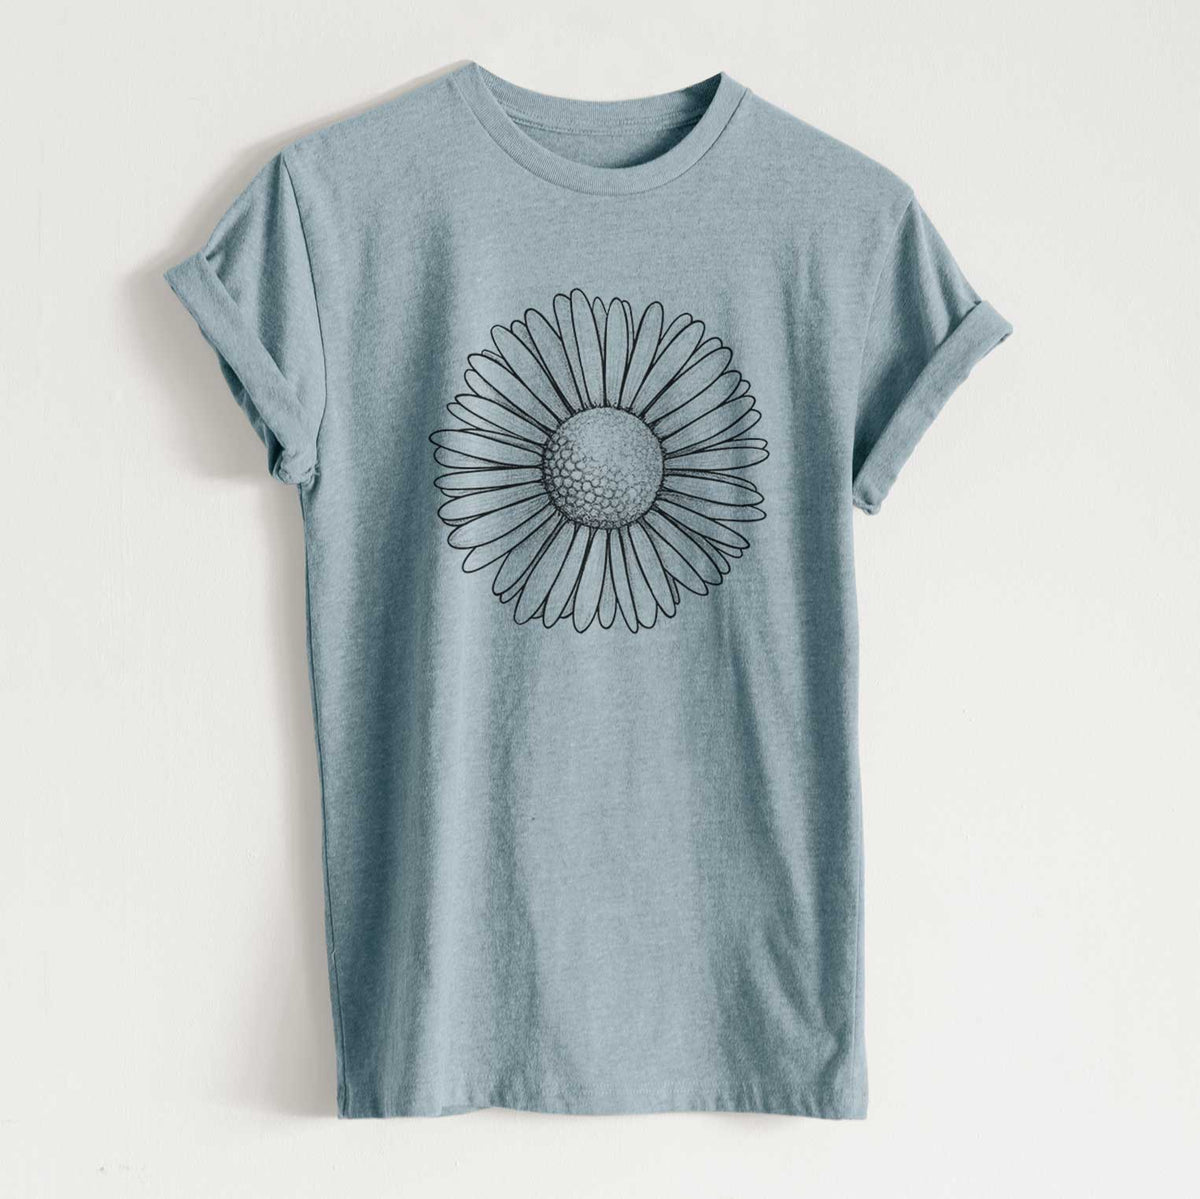 Bellis perennis - The Common Daisy - Unisex Recycled Eco Tee  - CLOSEOUT - FINAL SALE